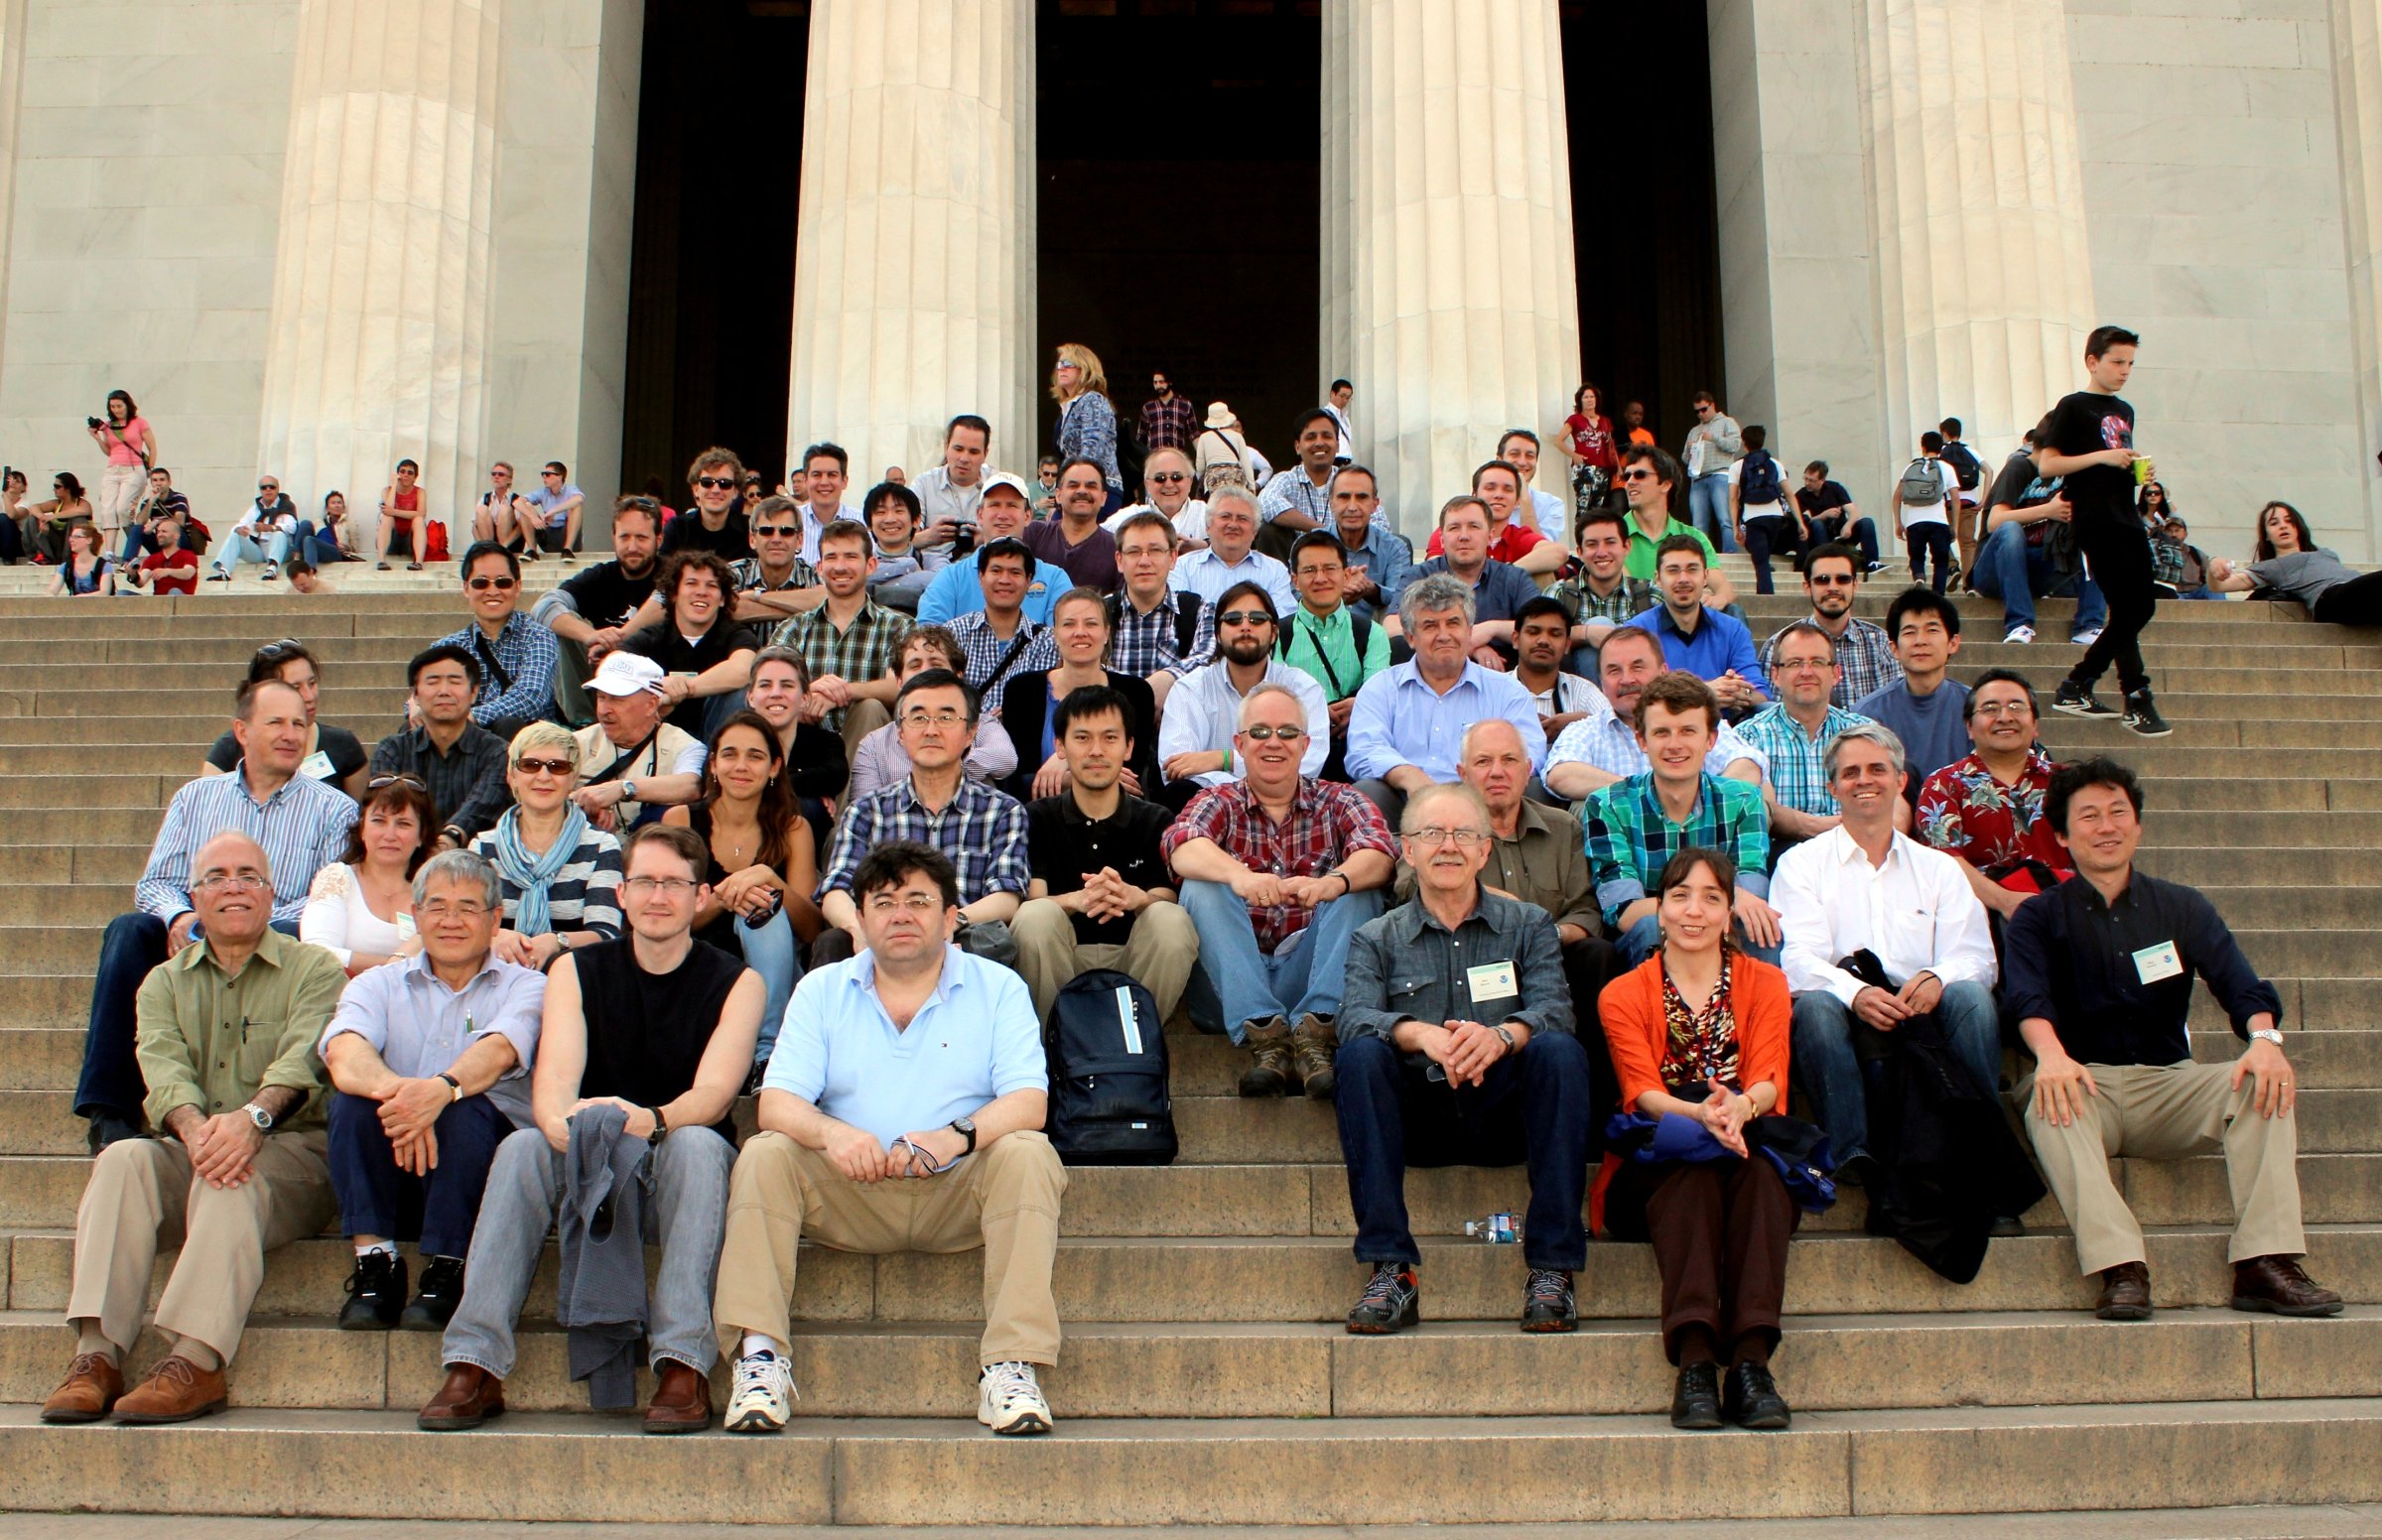 WISE 2013 group photo